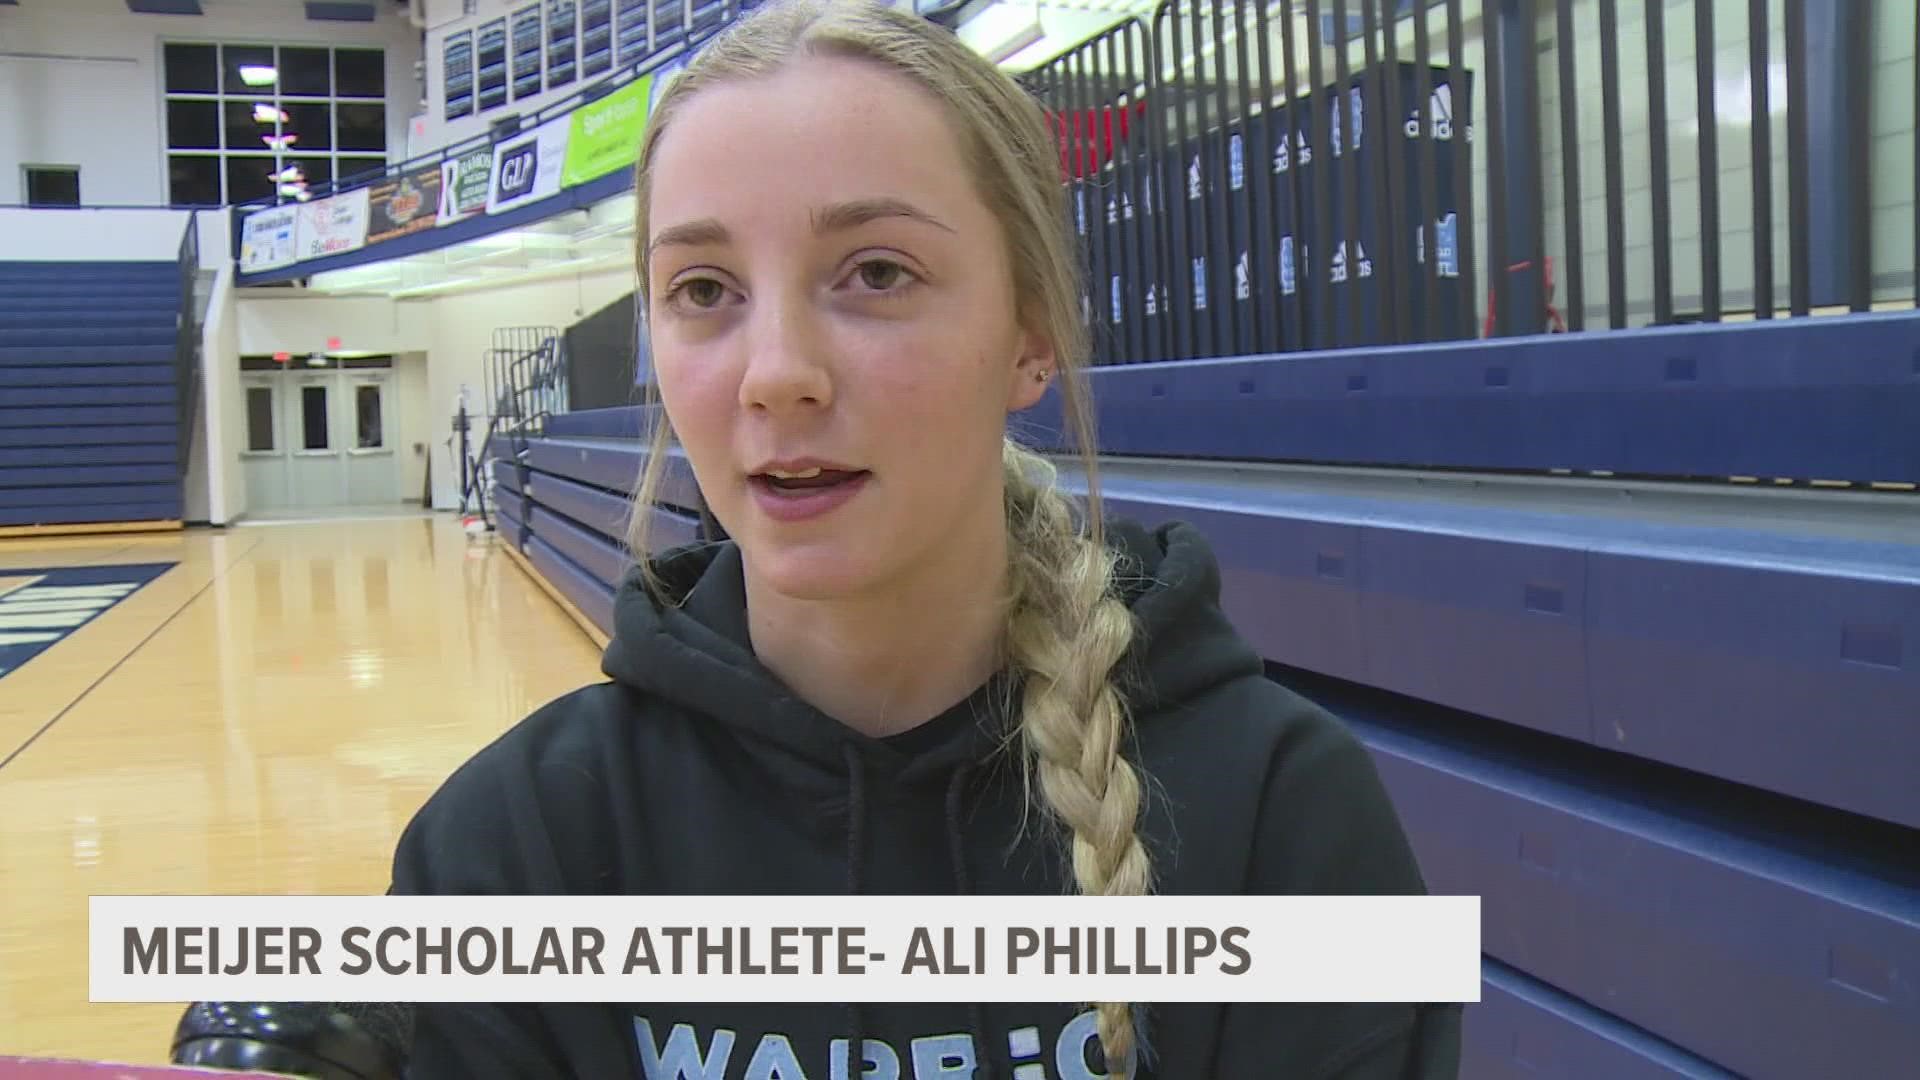 Being the daughter of a coach, Phillips knows all too well what she needs to do to be a great student athlete.